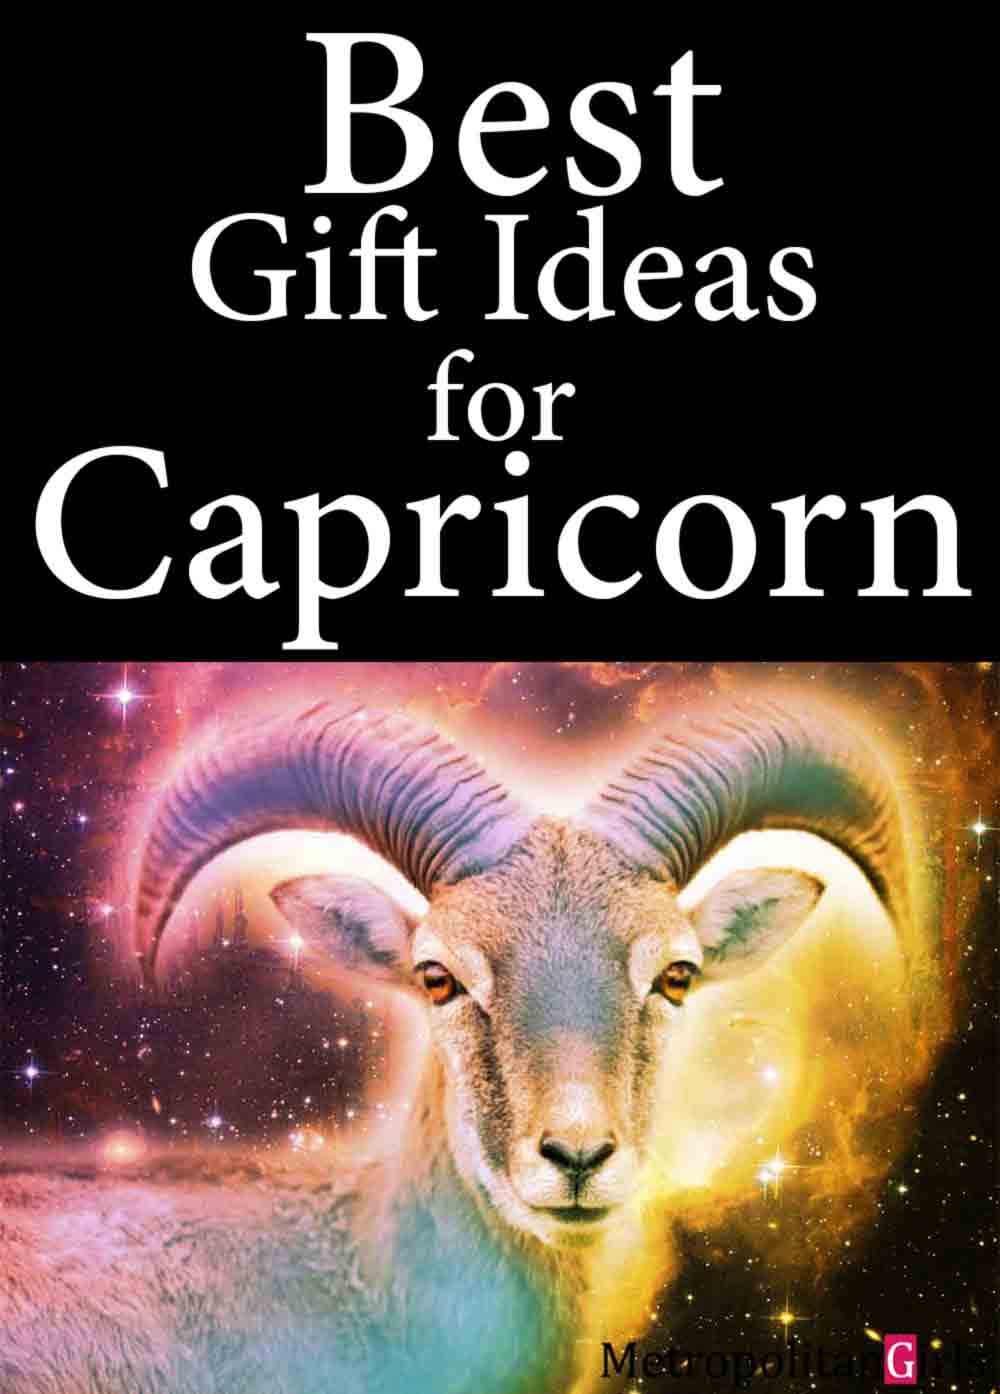 Find out what gifts does Capricorn like in this zodiac gift guide.